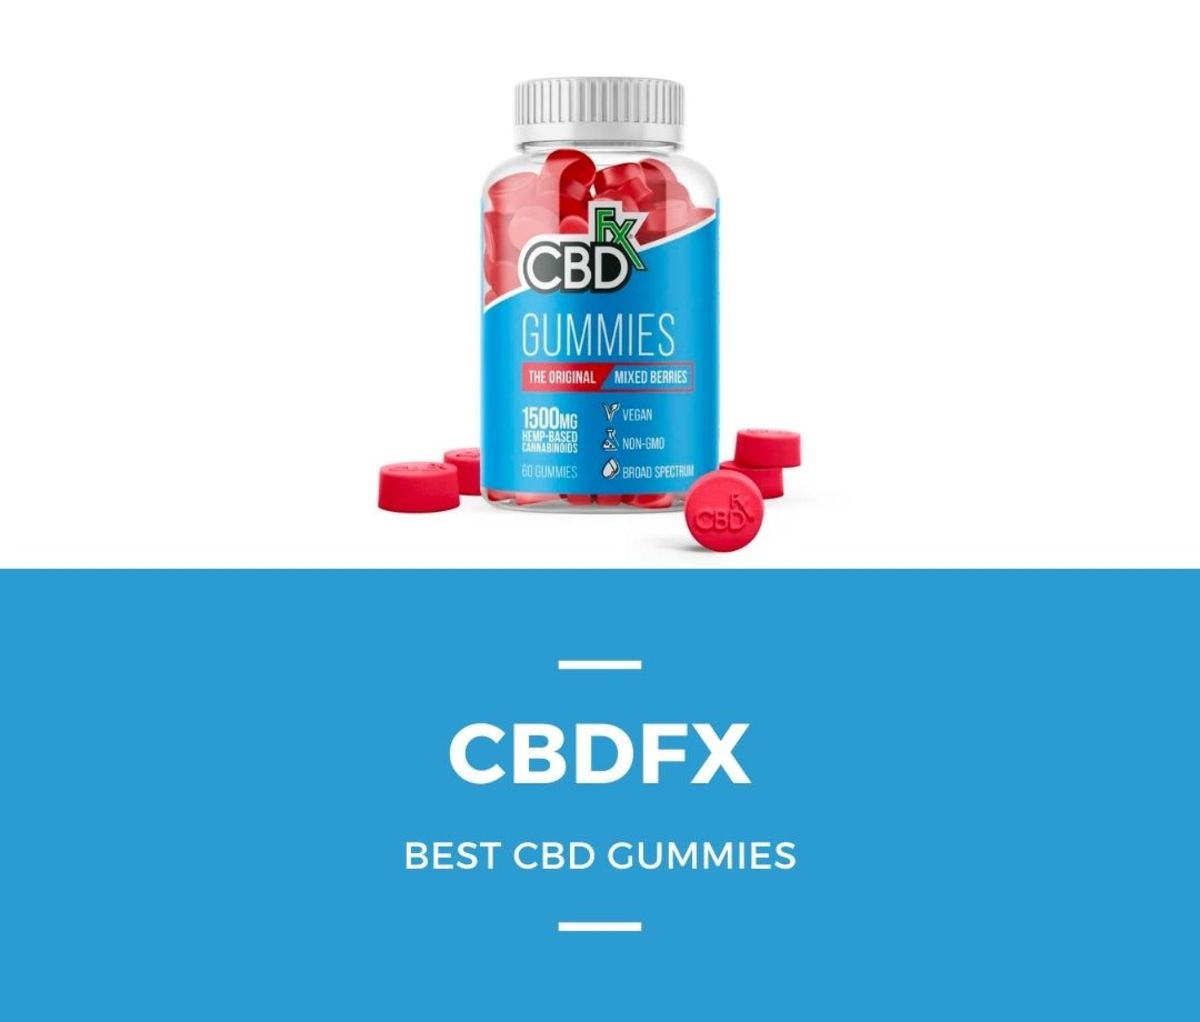 CBDfx – Overall Best CBD Gummies for Pain and Recovery